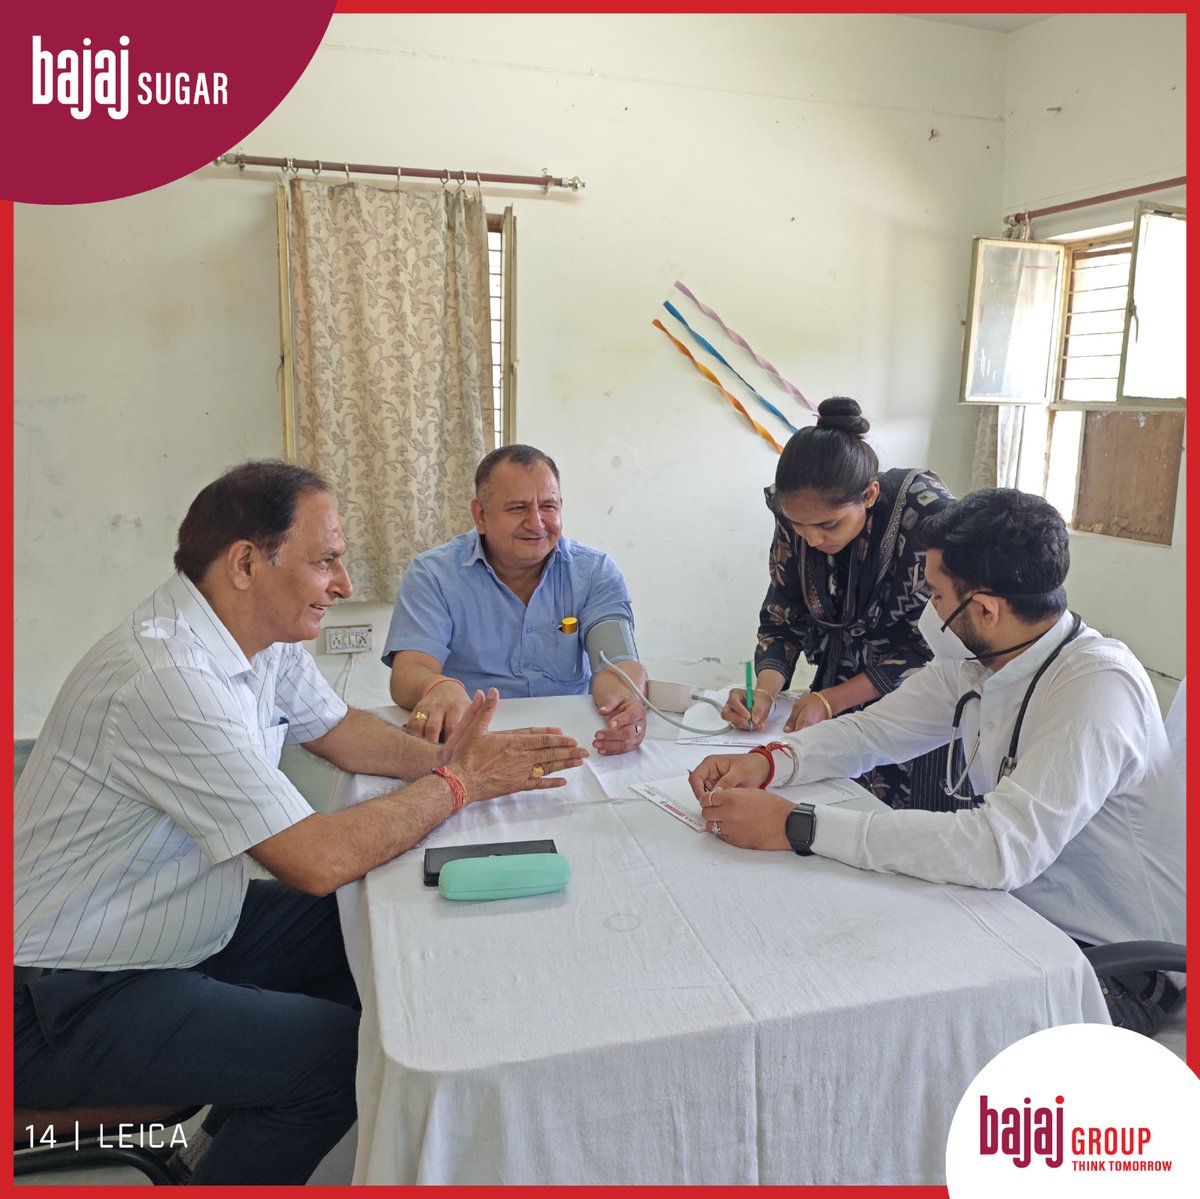 The medical camp featured general physicians and dental specialists, ensuring comprehensive care for all.

#HealthCamp #EmployeeWellness #BajajSugar #SugarProducer #92YearsOfSweetness #BajajGroup #ThinkTomorrow